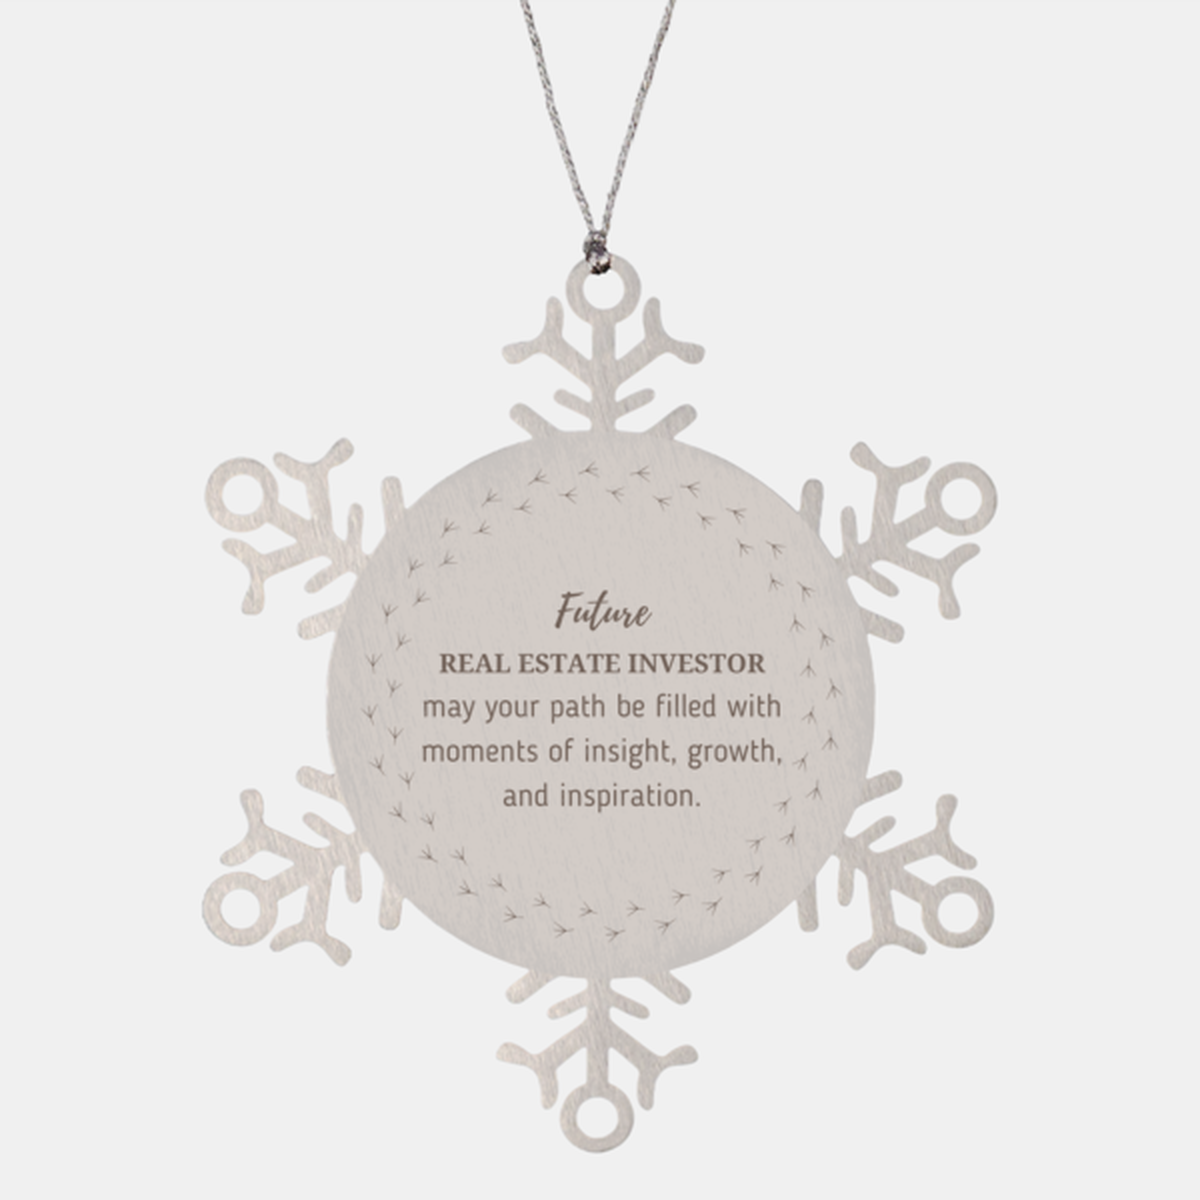 Future Real Estate Investor Gifts, May your path be filled with moments of insight, Graduation Gifts for New Real Estate Investor, Christmas Unique Snowflake Ornament For Men, Women, Friends